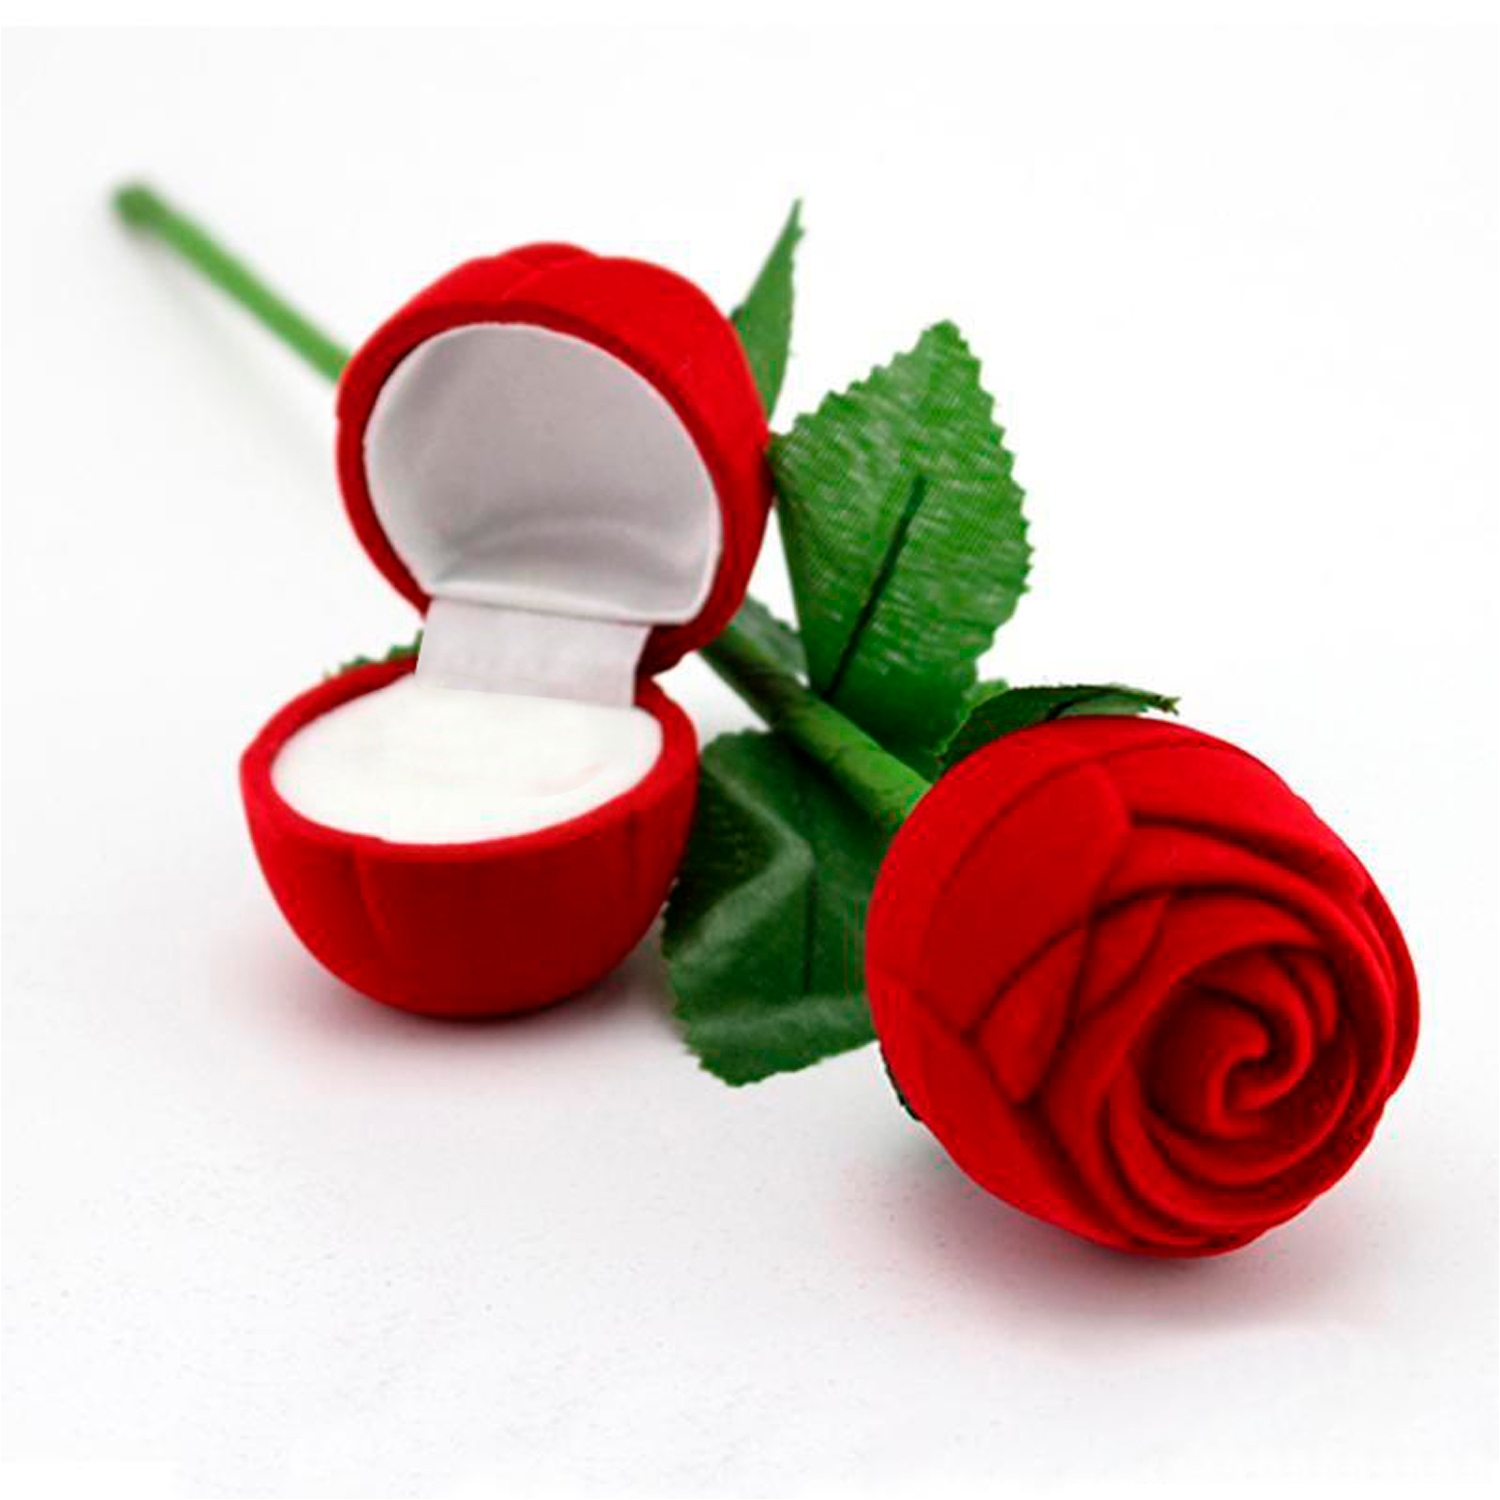 A bouquet of 50 red roses is a perfect gift for someone special.